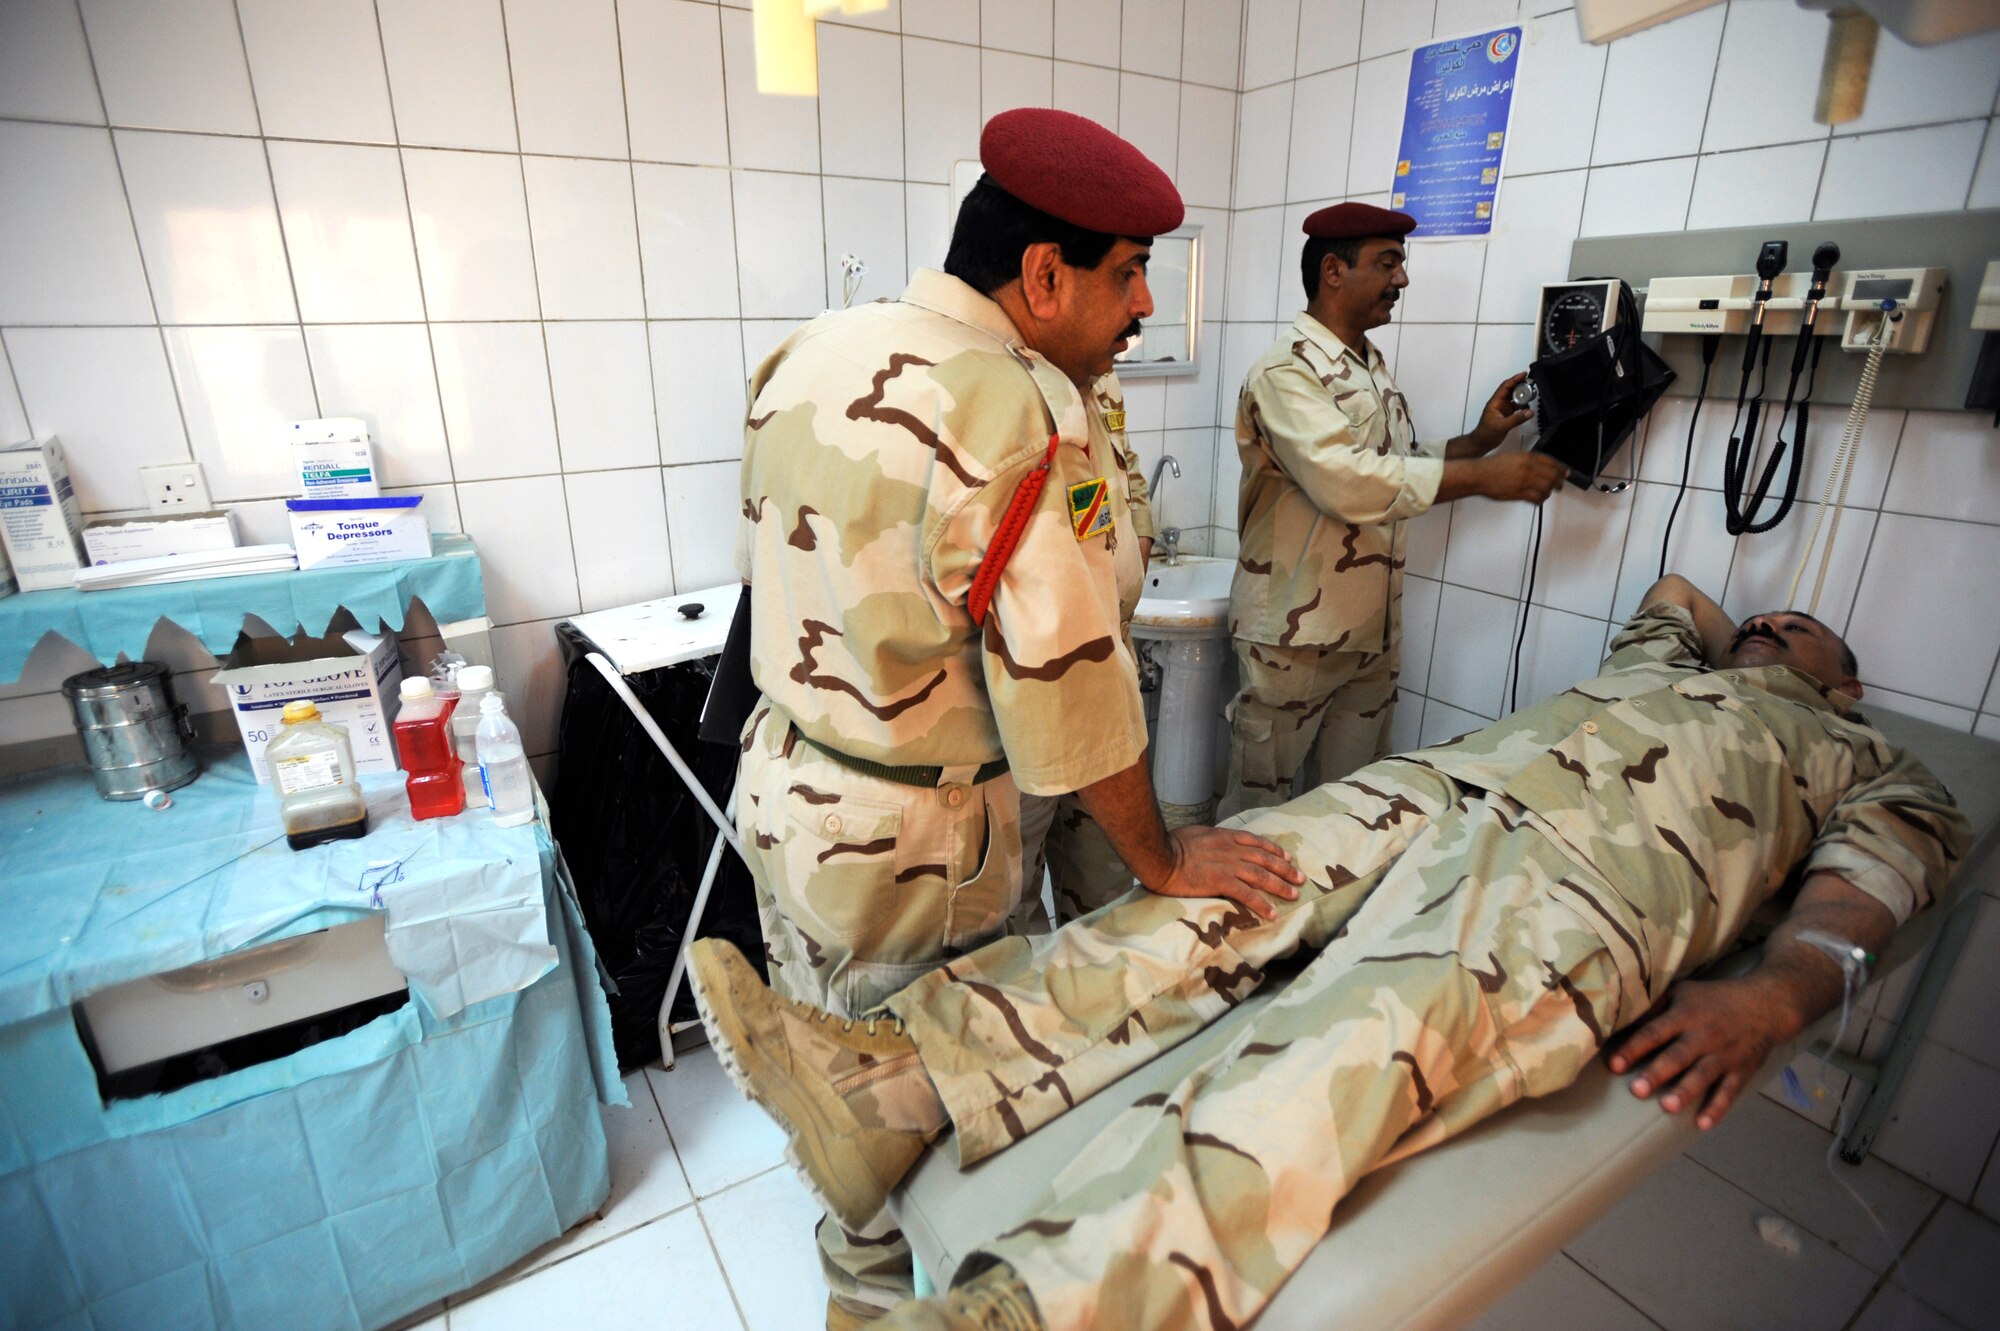 An Iraqi medical technician exams a fellow soldier in the clinic Aug. 17, 2009, at Camp Ur, Iraq. The Iraqi camp boasts a fully functioning medical clinic complete with a three-bay emergency room, pharmacy, dentist, radiology department and public health, as well as a highly trained team of doctors, nurses and technicians on staff. (U.S. Air Force photo/Staff Sgt. Shawn Weismiller) 